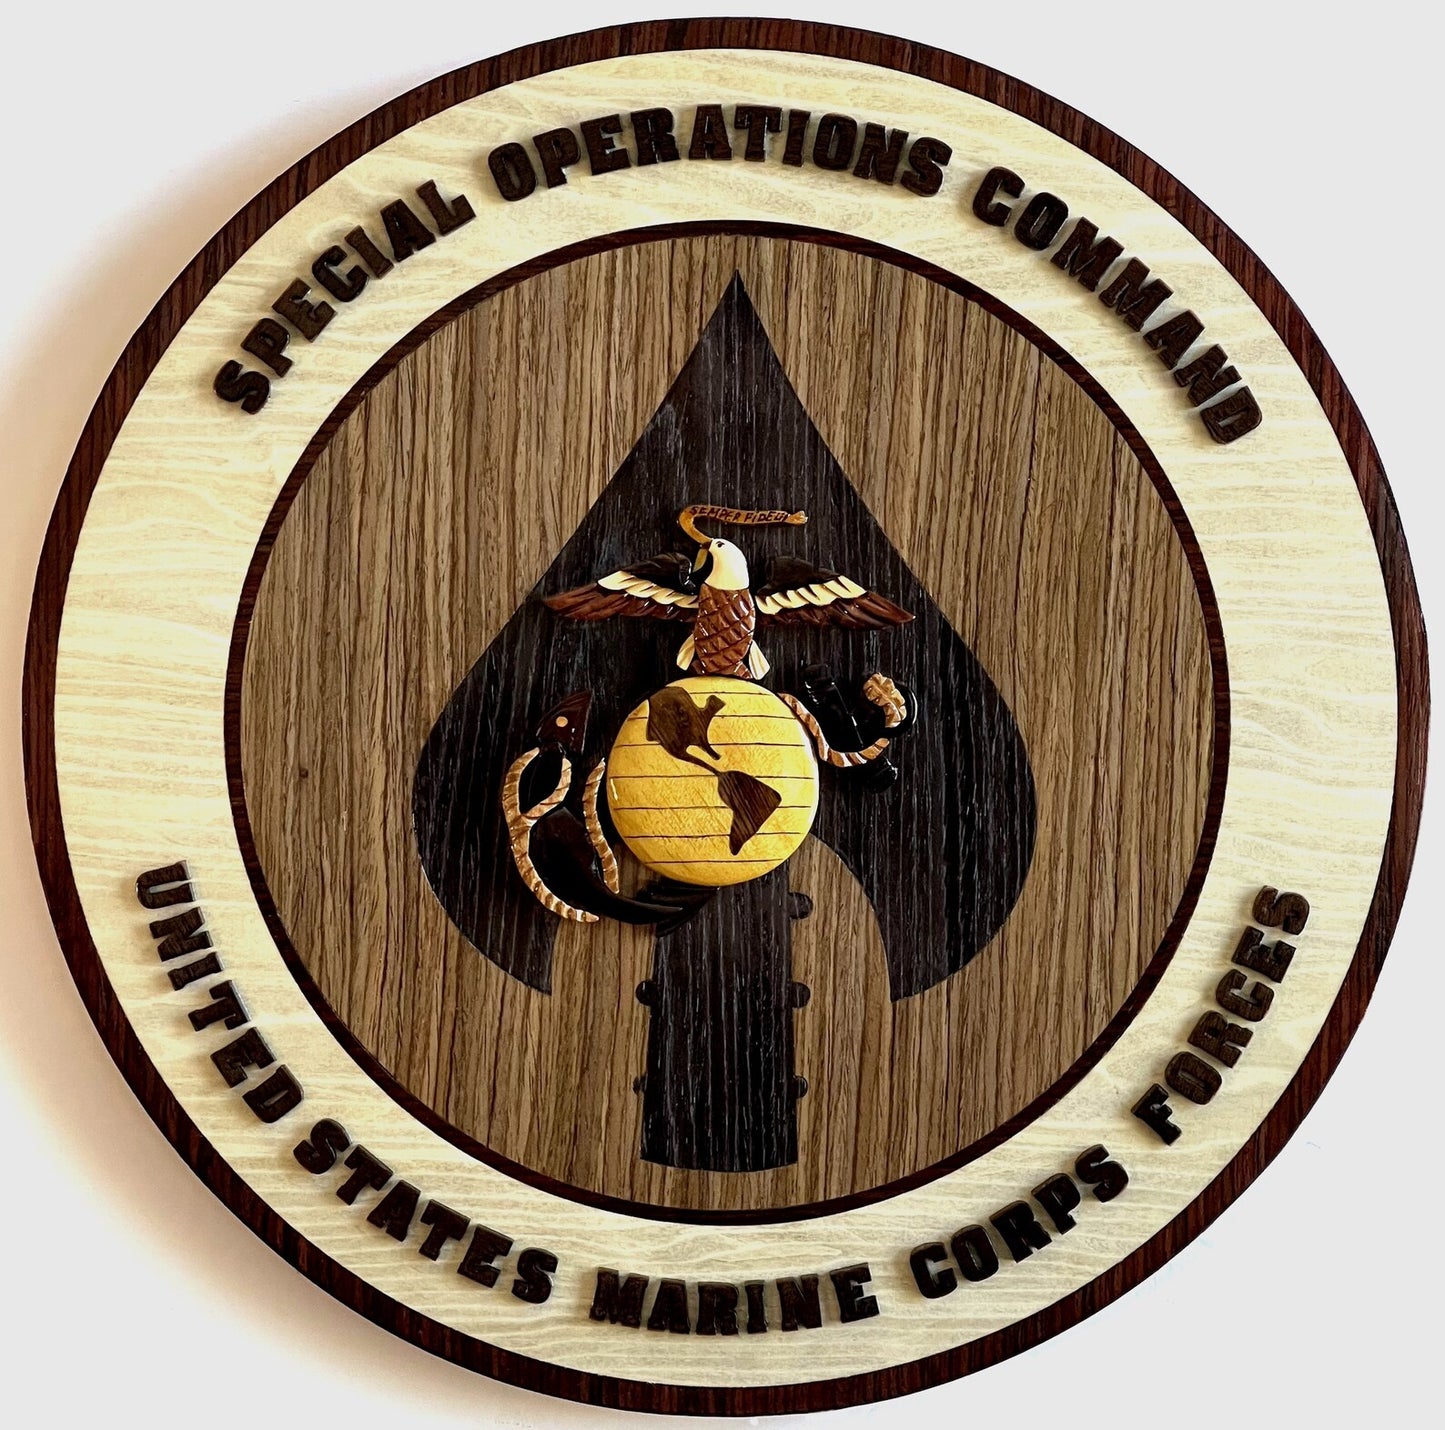 MARINE CORPS SPECIAL OPS COMMAND (MARSOC)